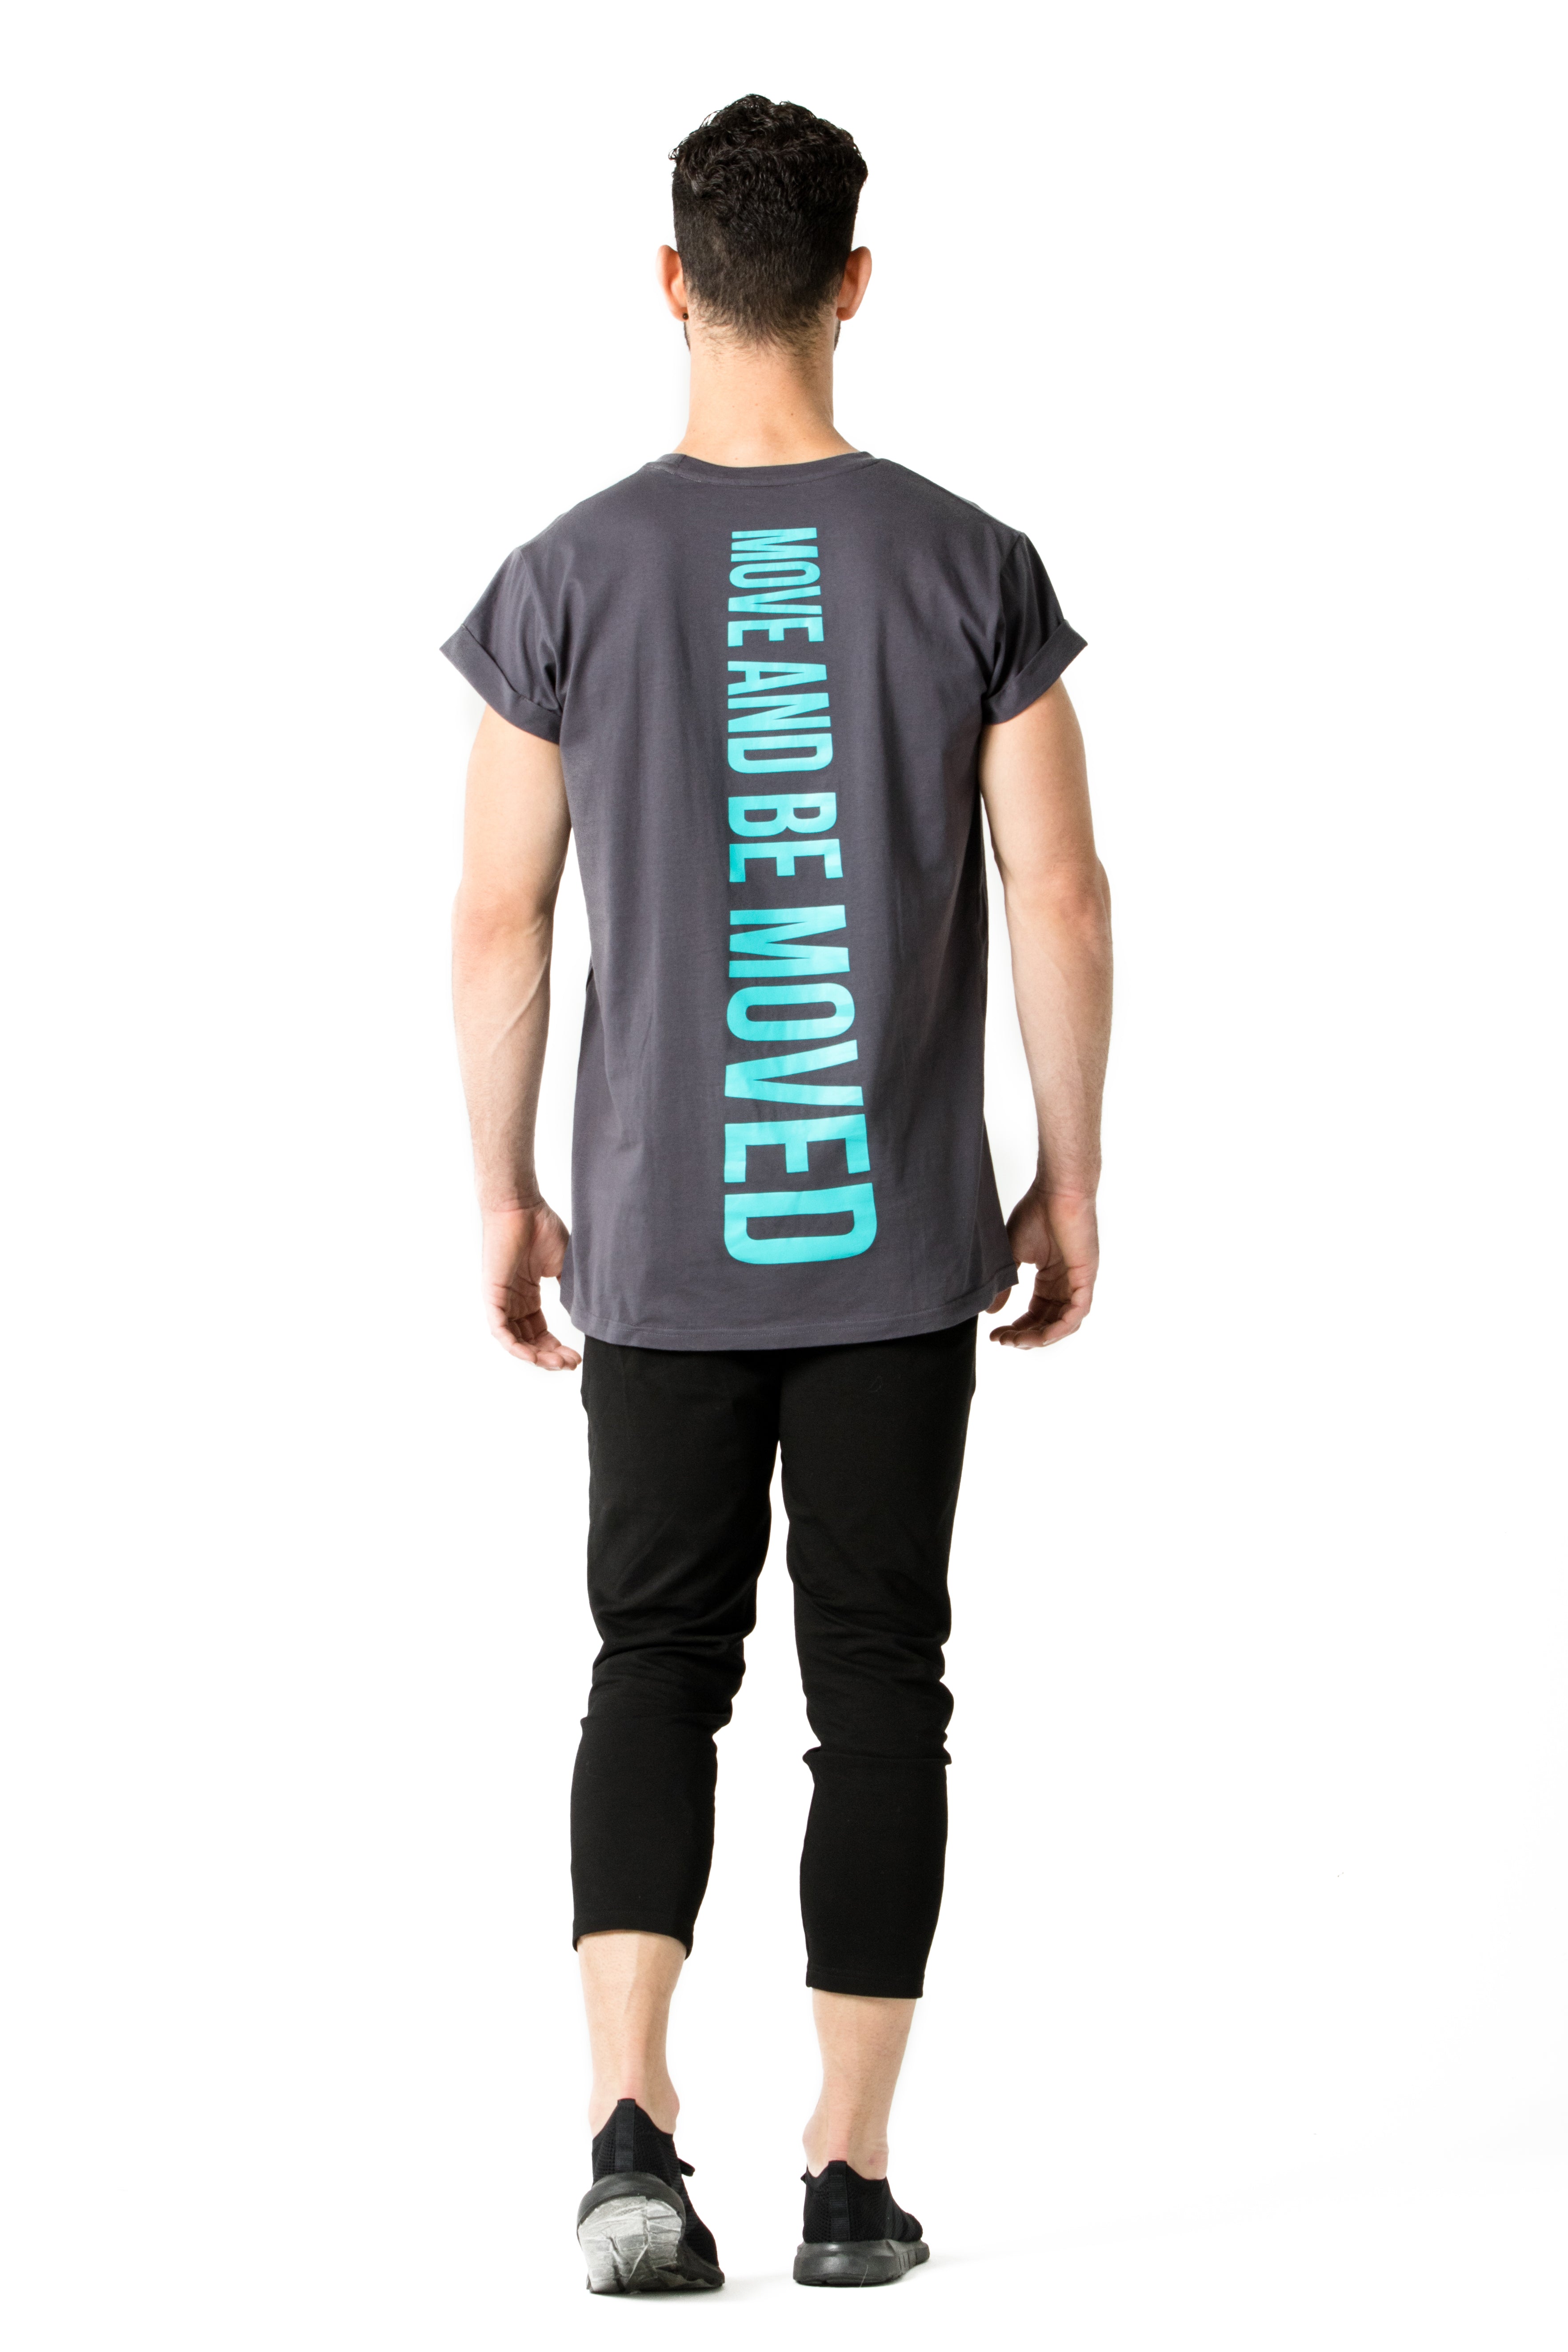 Move and Be Moved Tee